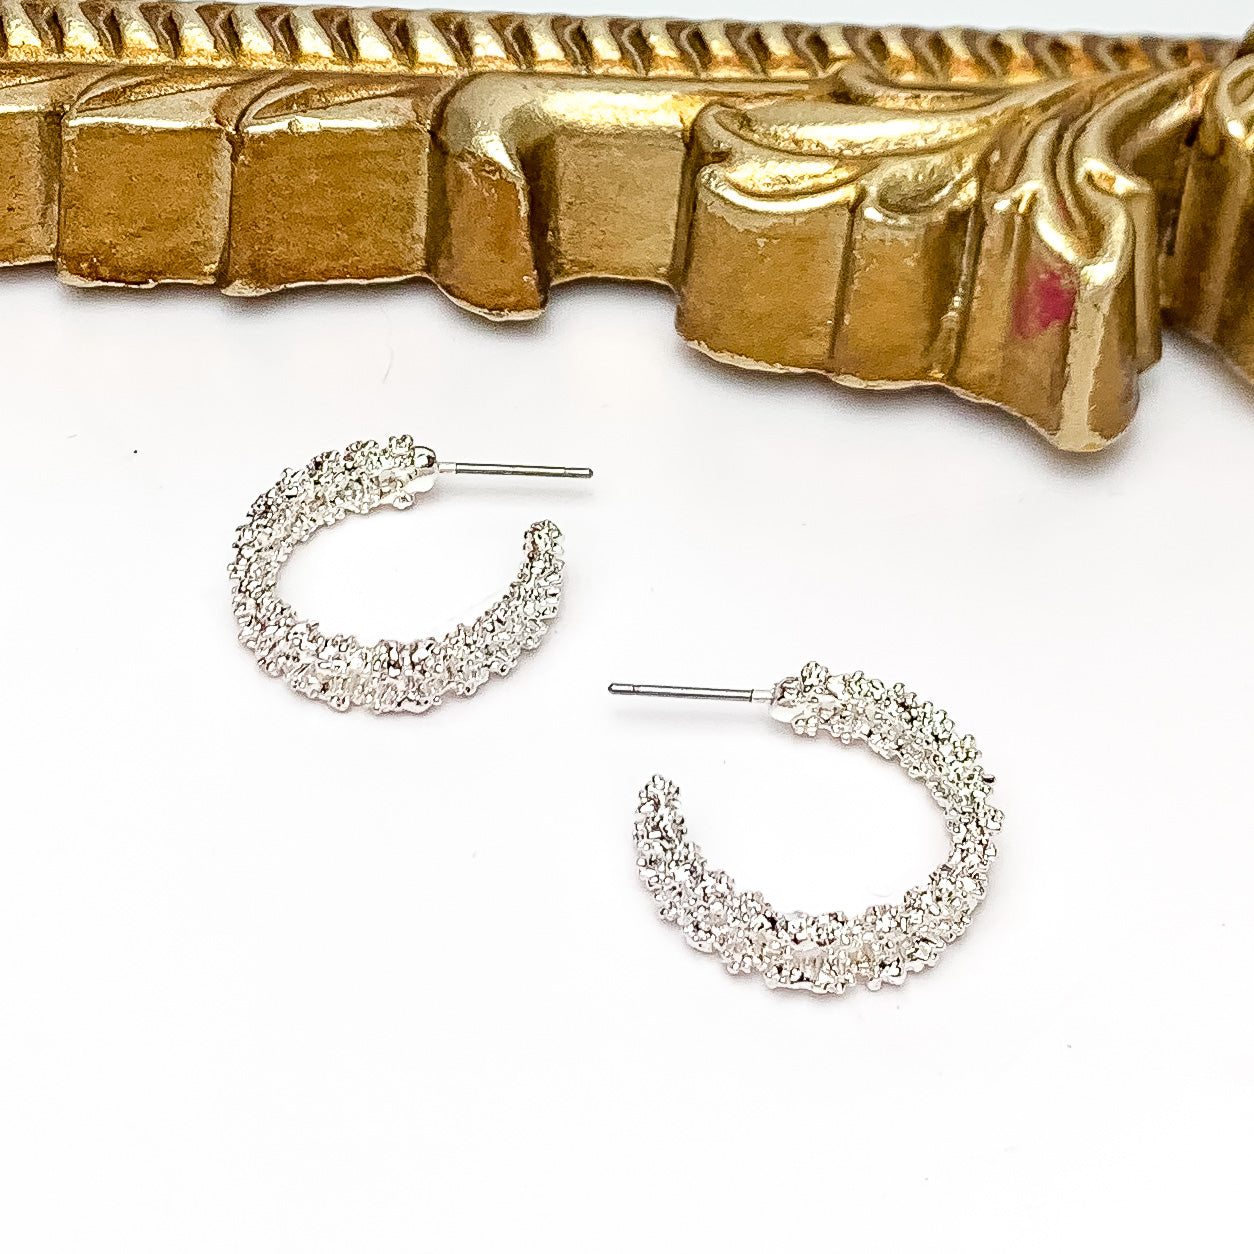 Worry Free Small Silver Tone Textured Hoop Earrings. Pictured on a white background with a gold frame above the earrings.